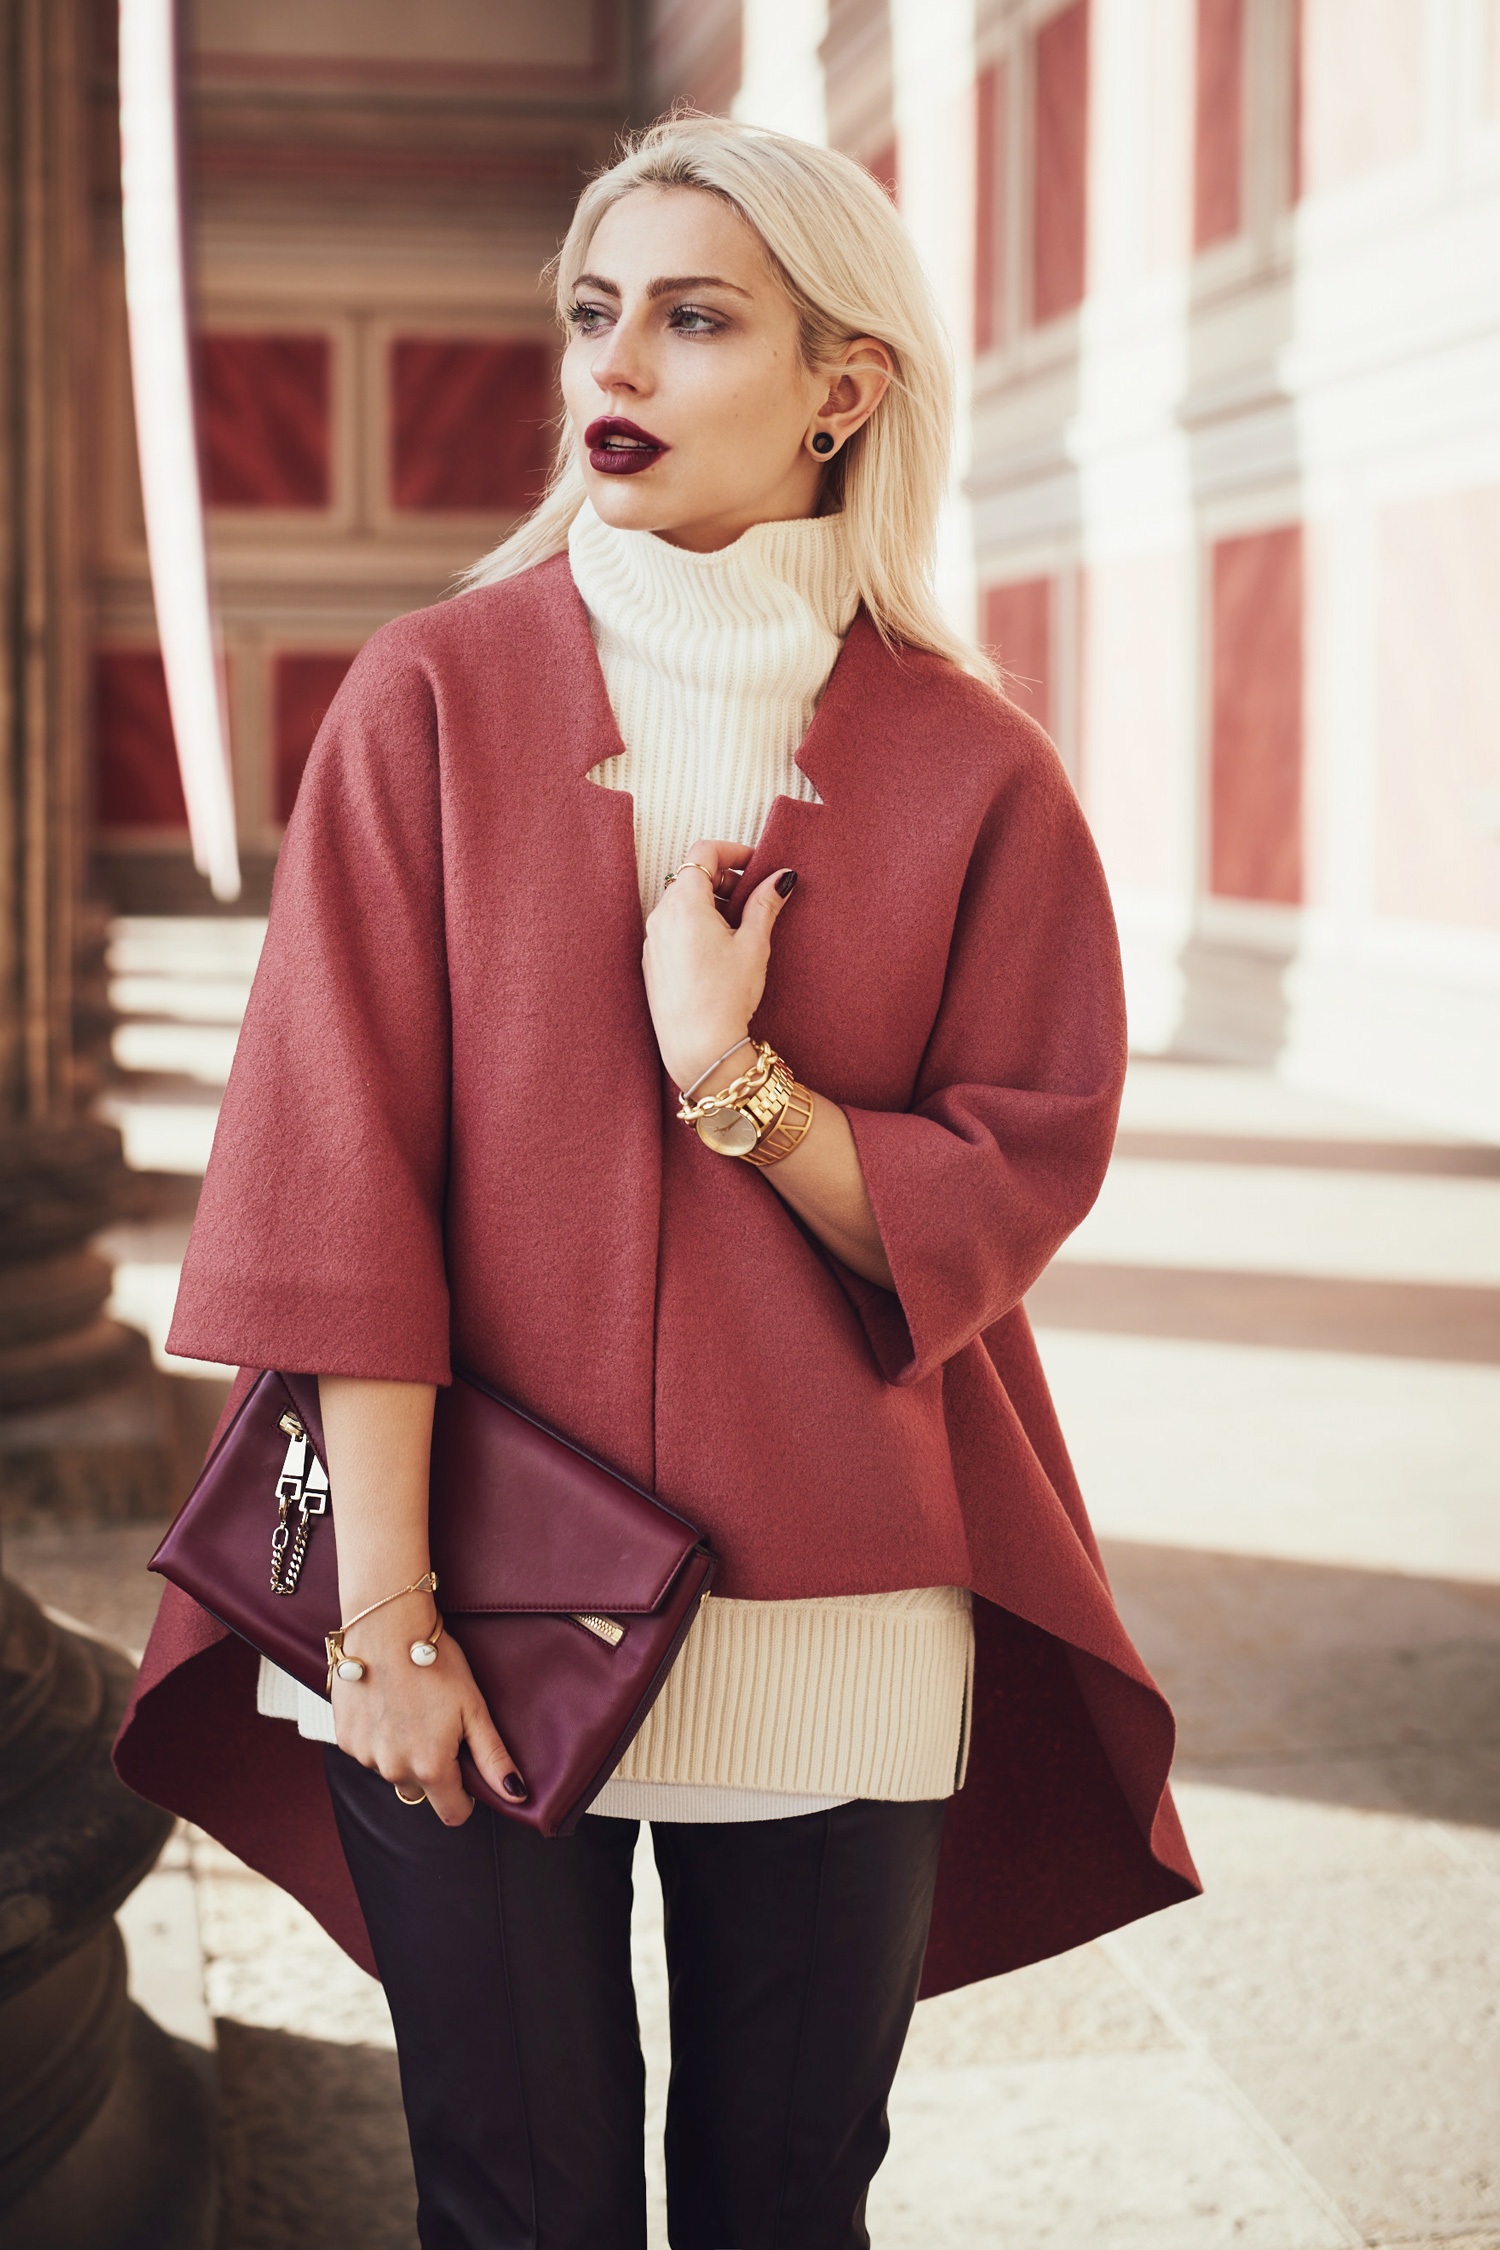 View more details on my blog | street style from Berlin | wearing Vince, Cos and Chloe | burgundy & red | via Masha Sedgwick | fashion blog 